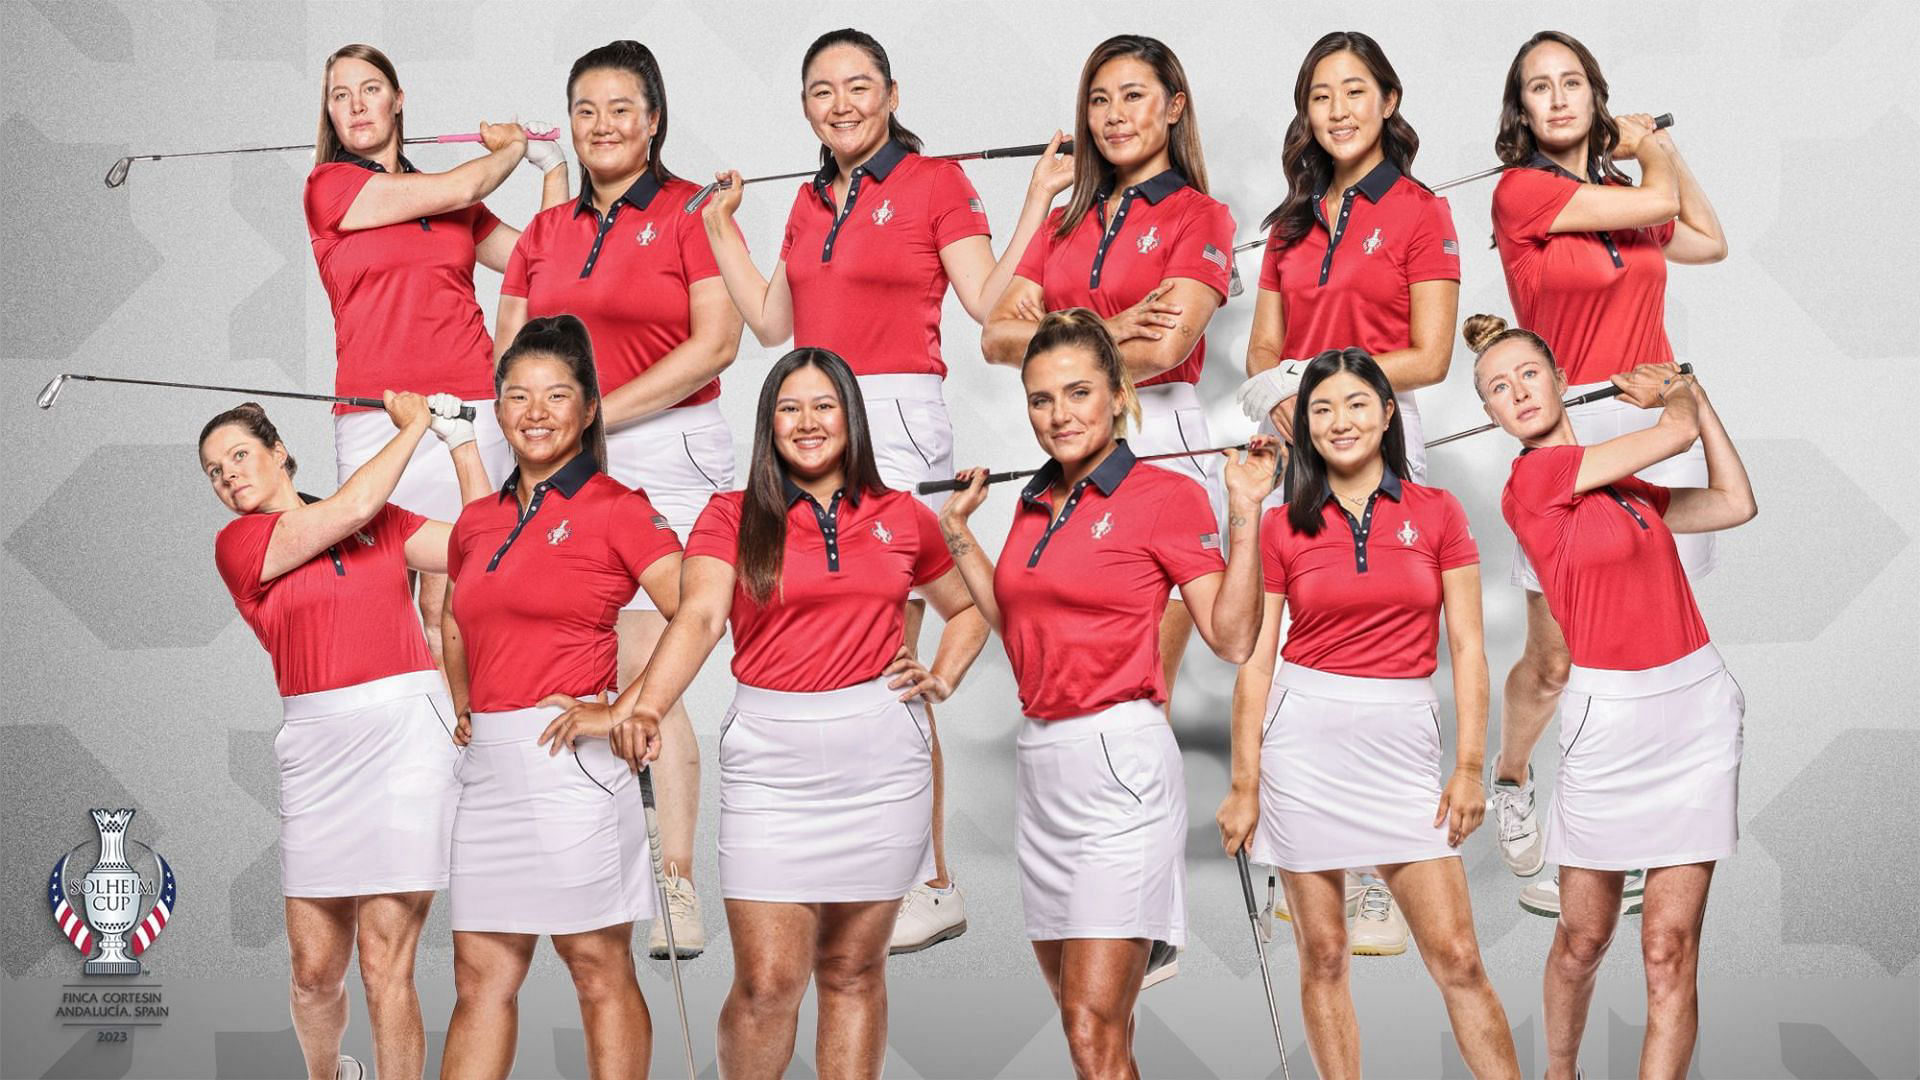 Team USA's lineup for the 2023 Solheim Cup in Spain revealed